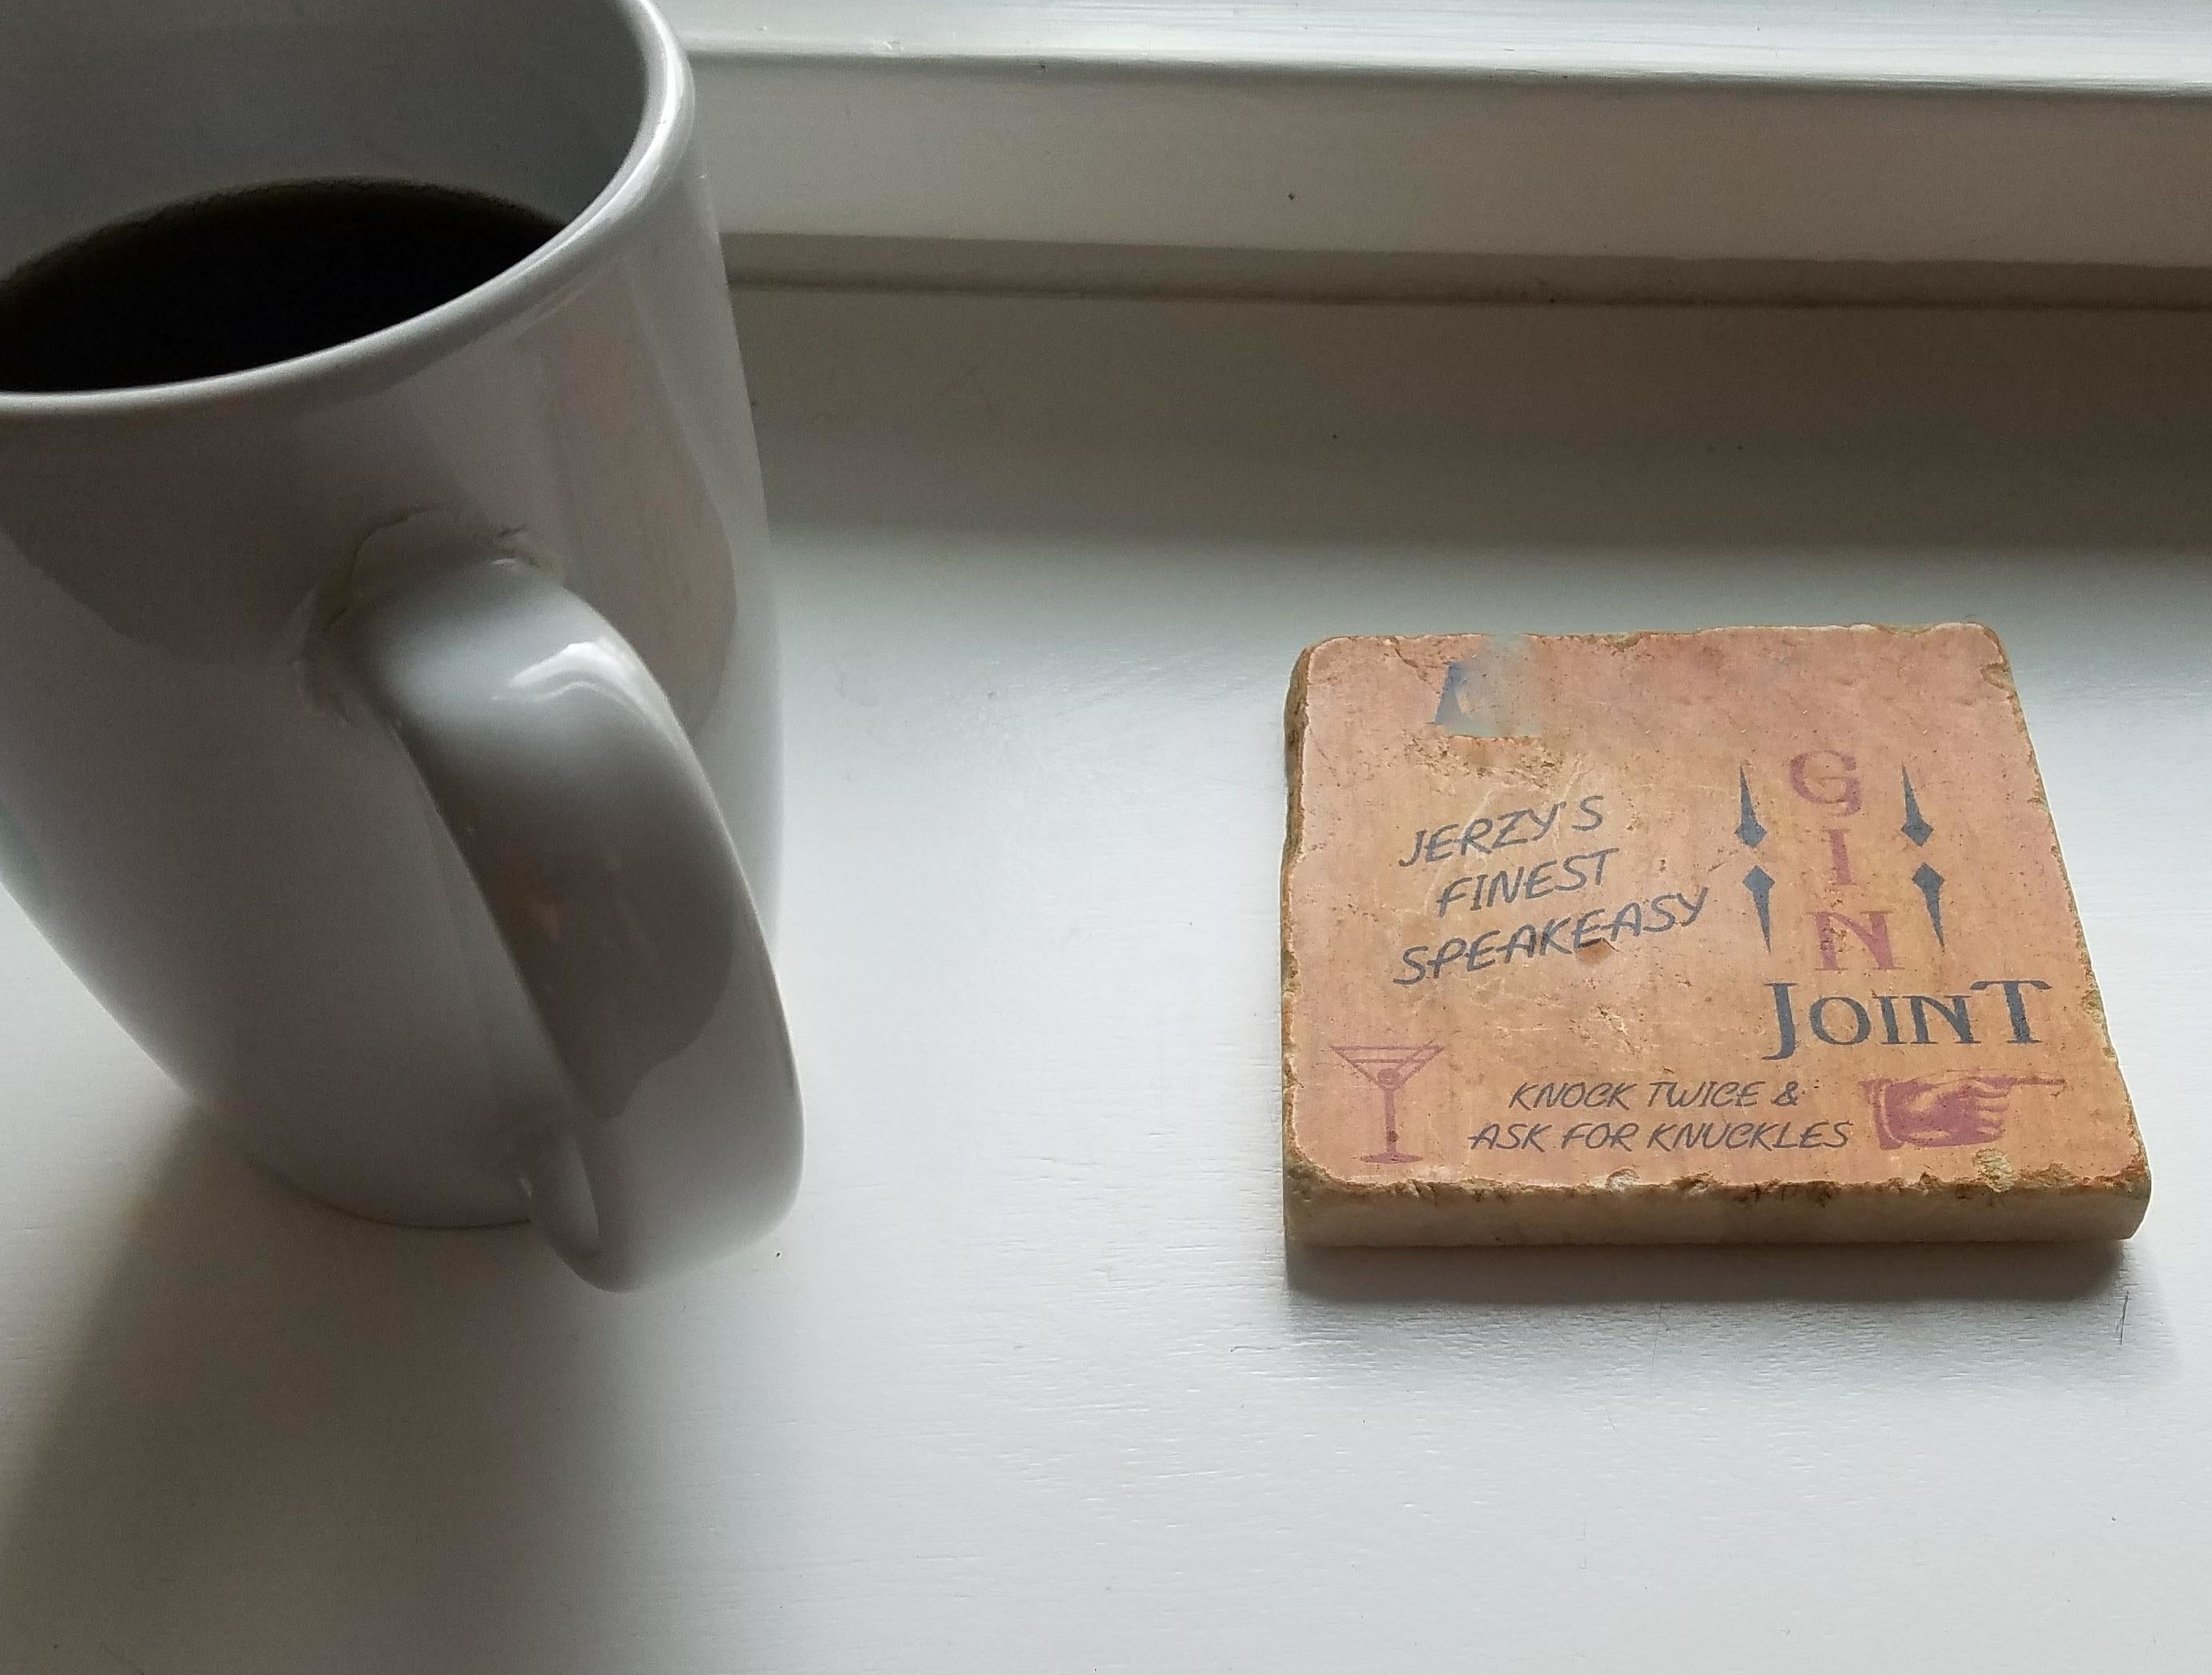 A mug next to two coasters with text; one says &quot;Jerry&#x27;s Finest Speakeasy&quot; and the other mentions &quot;Benjamin&#x27;s Finest Speakeasy.&quot;